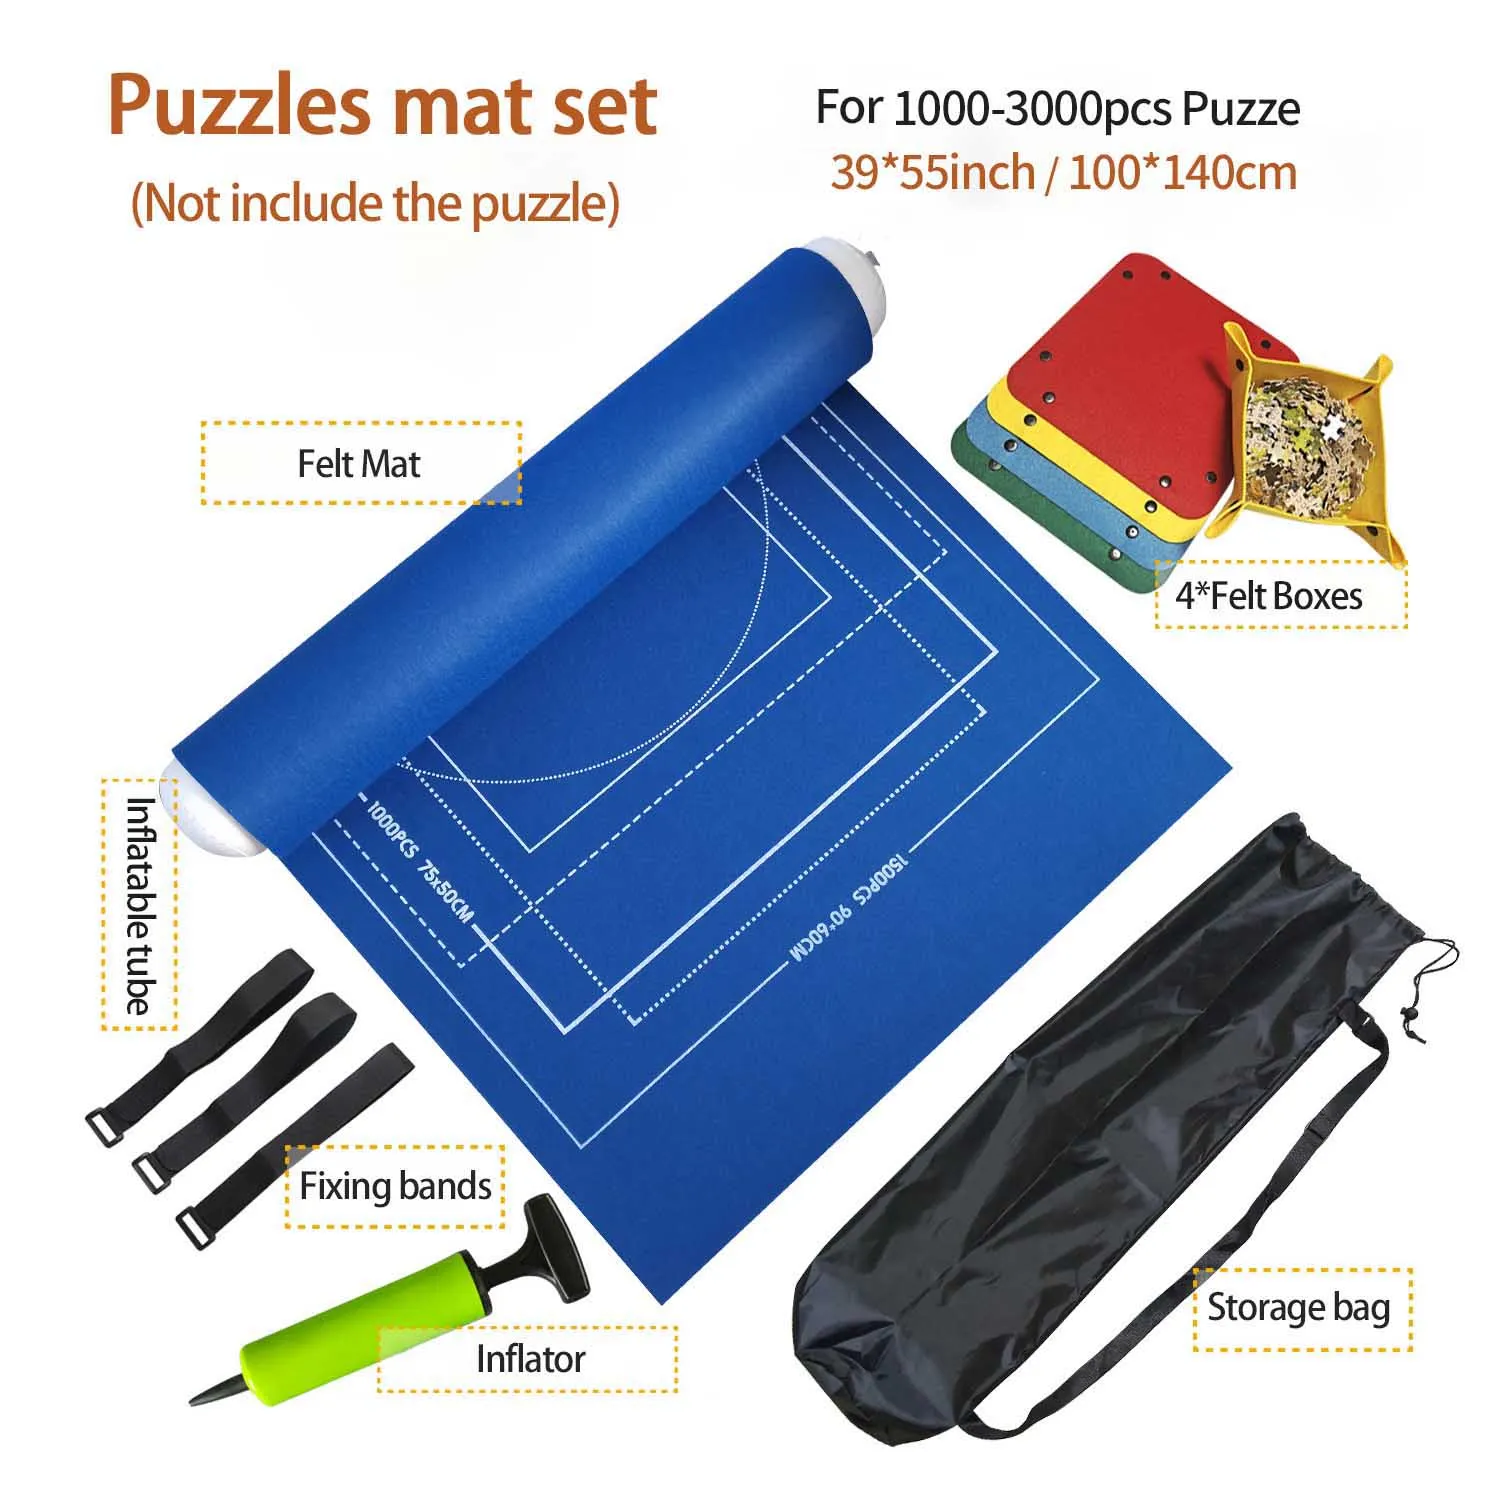 

Puzzles Mat Jigsaw Roll Felt Mat Play mat Puzzles Blanket For Up to 3000 Pcs Puzzle Accessories Portable Travel Storage bag